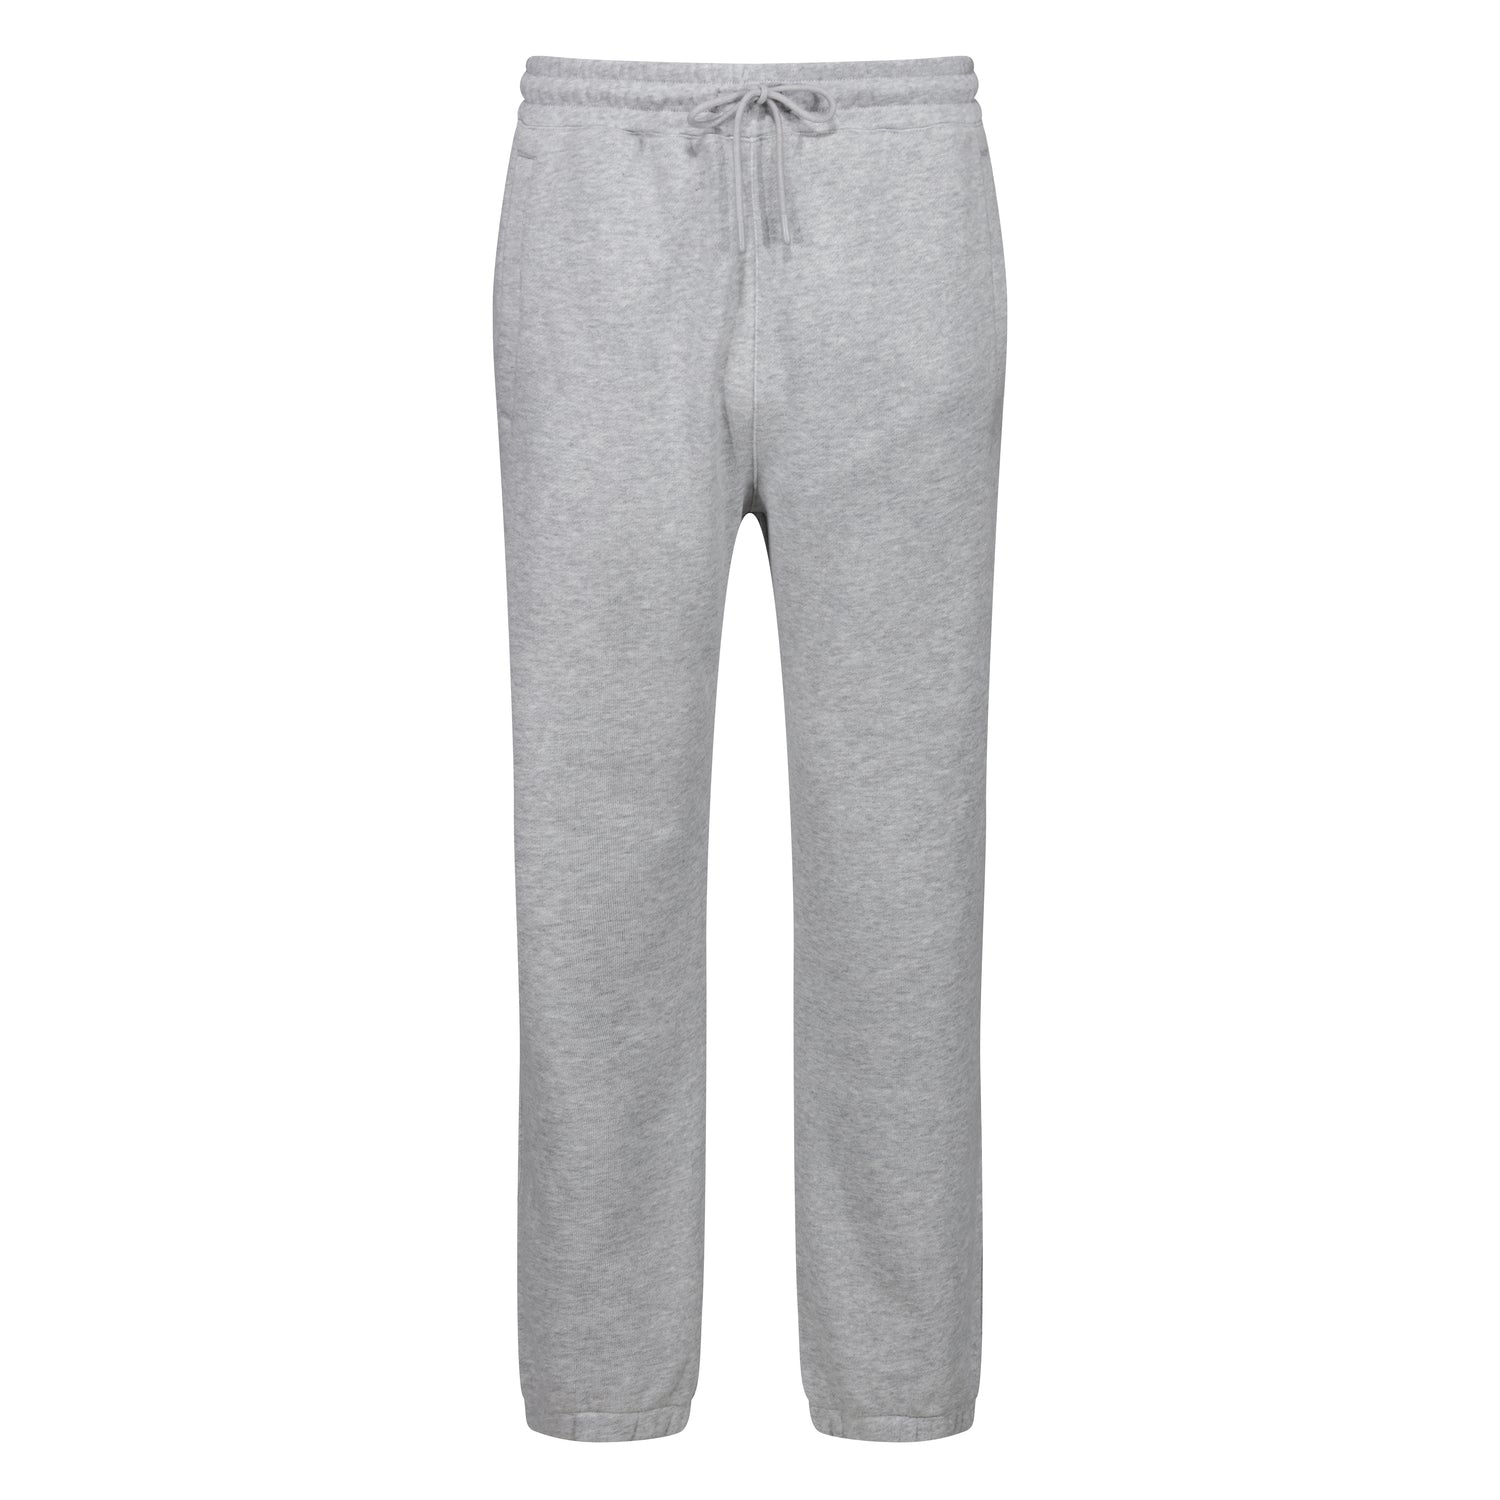 GREY RELAXED FIT JOGGERS WHITE Y LOGO – YELIR WORLD